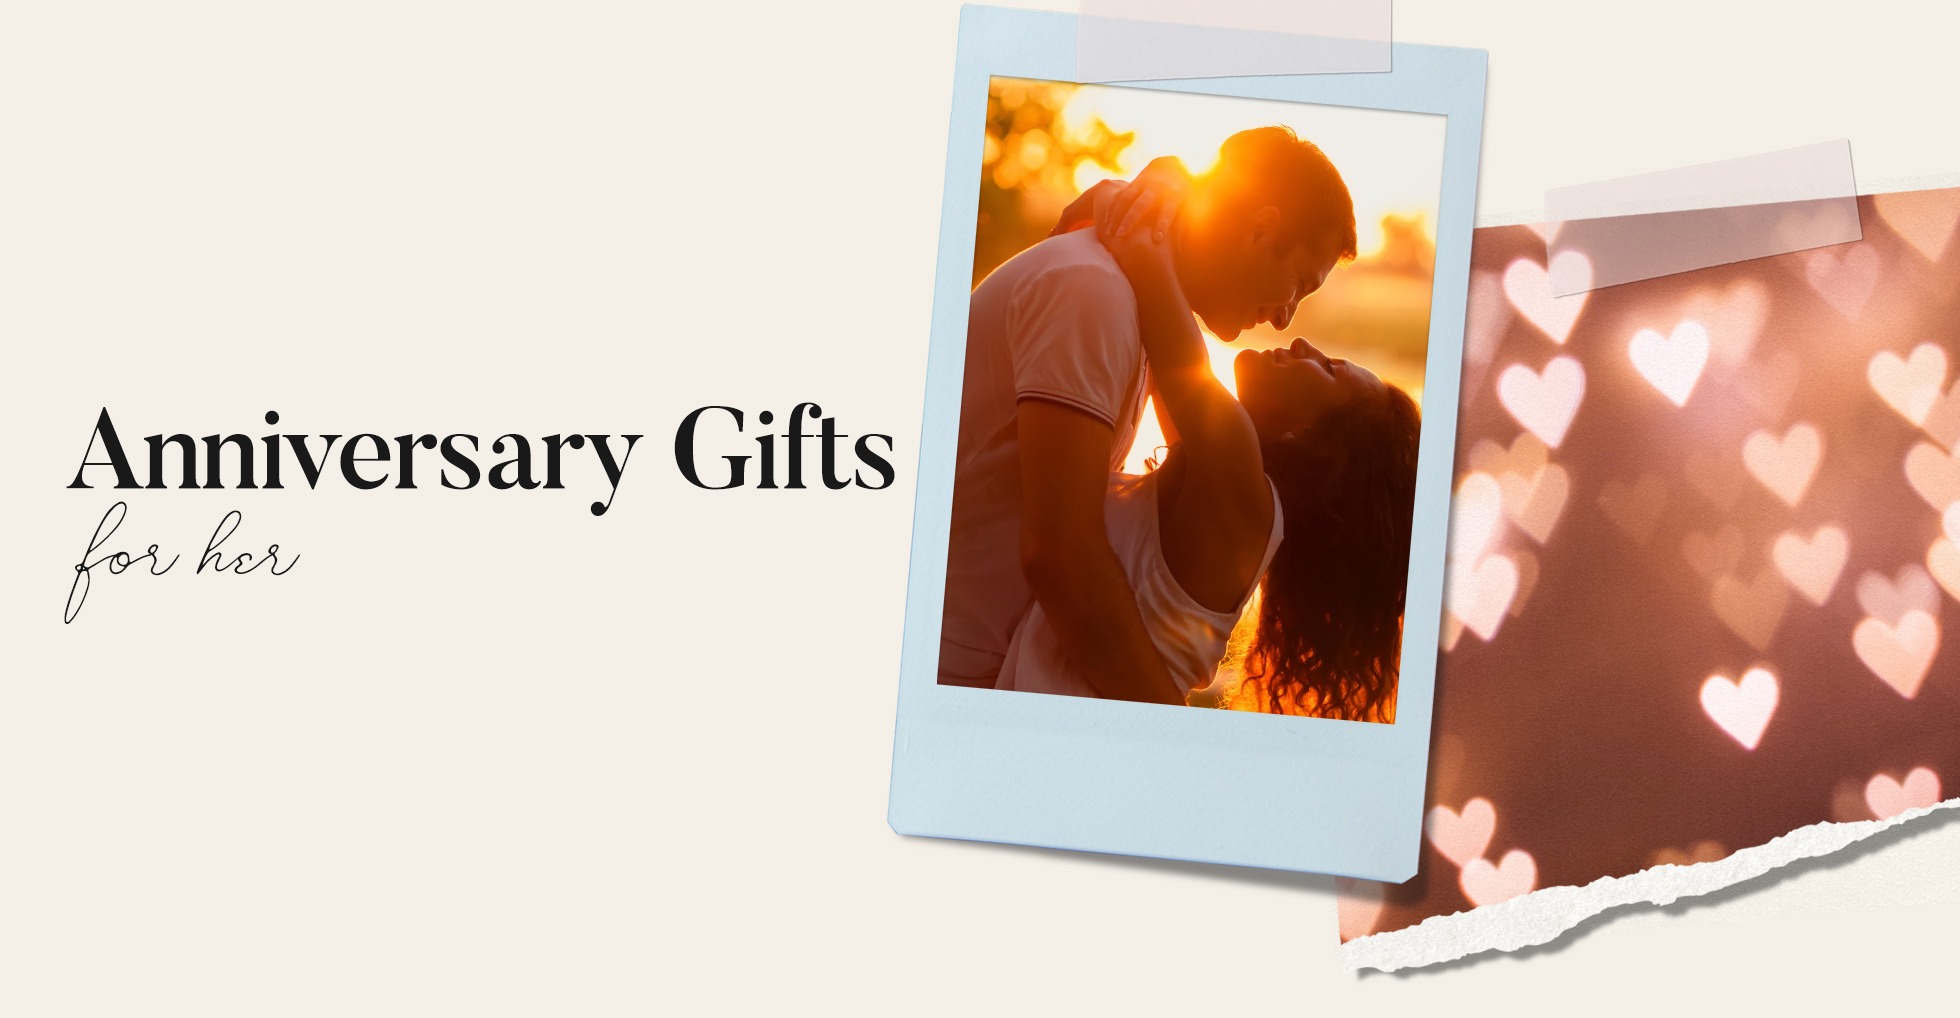 7 Best Anniversary Gifts for Her Guide